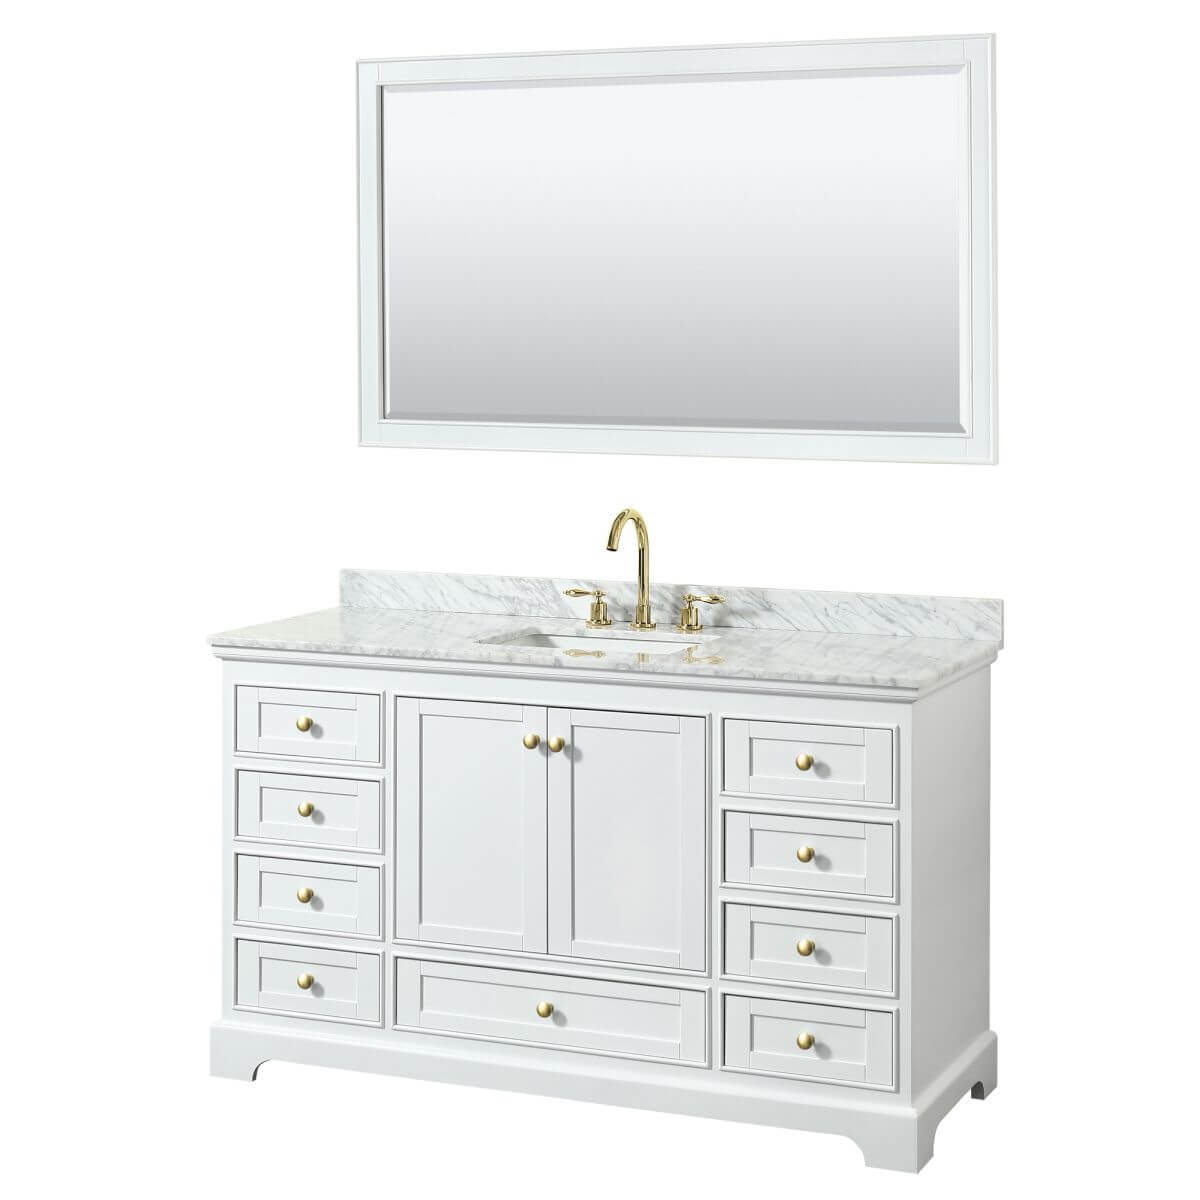 Wyndham Collection Deborah 60 inch Single Bathroom Vanity in White with White Carrara Marble Countertop, Undermount Square Sink, Brushed Gold Trim and 58 inch Mirror - WCS202060SWGCMUNSM58